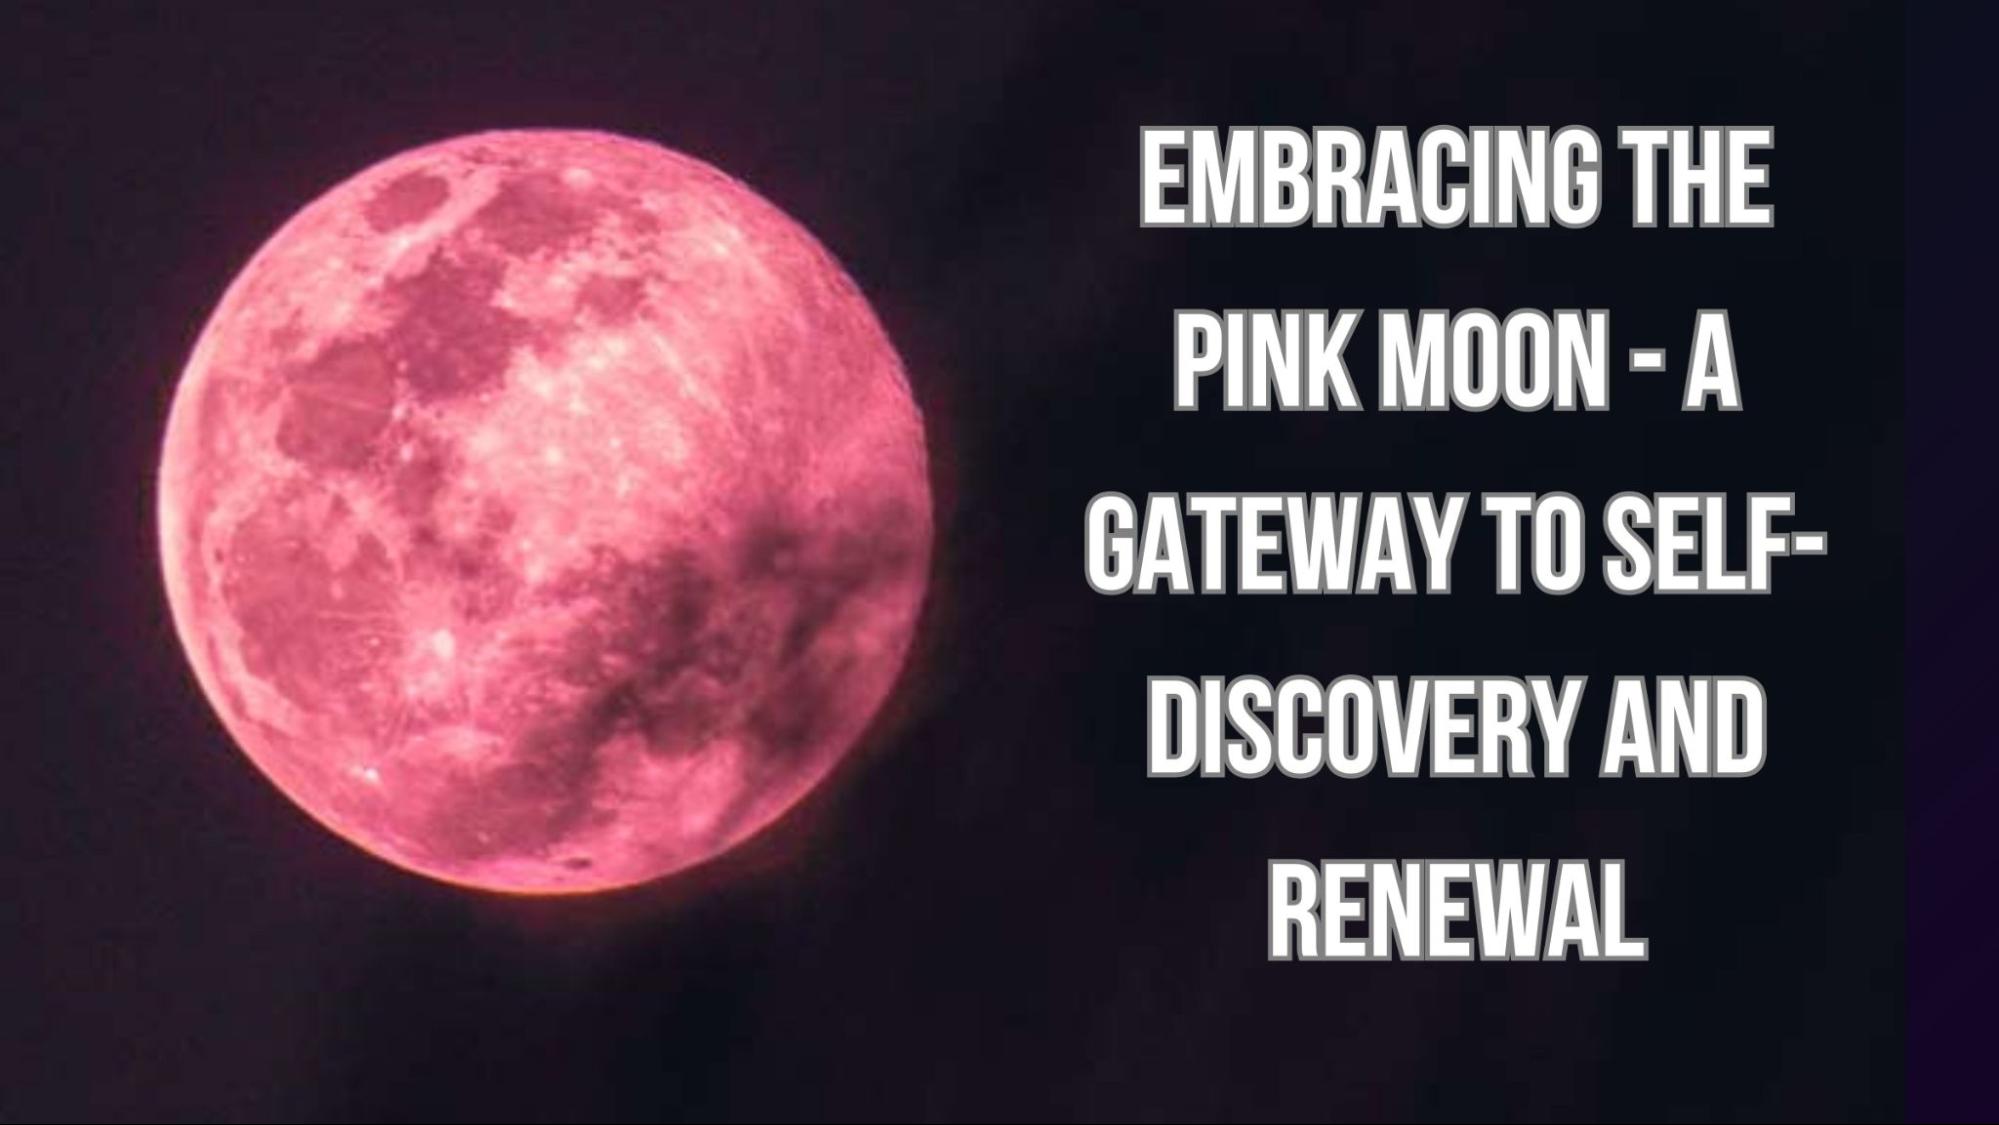 Embracing the Pink Moon - A Gateway to Self-Discovery and Renewal